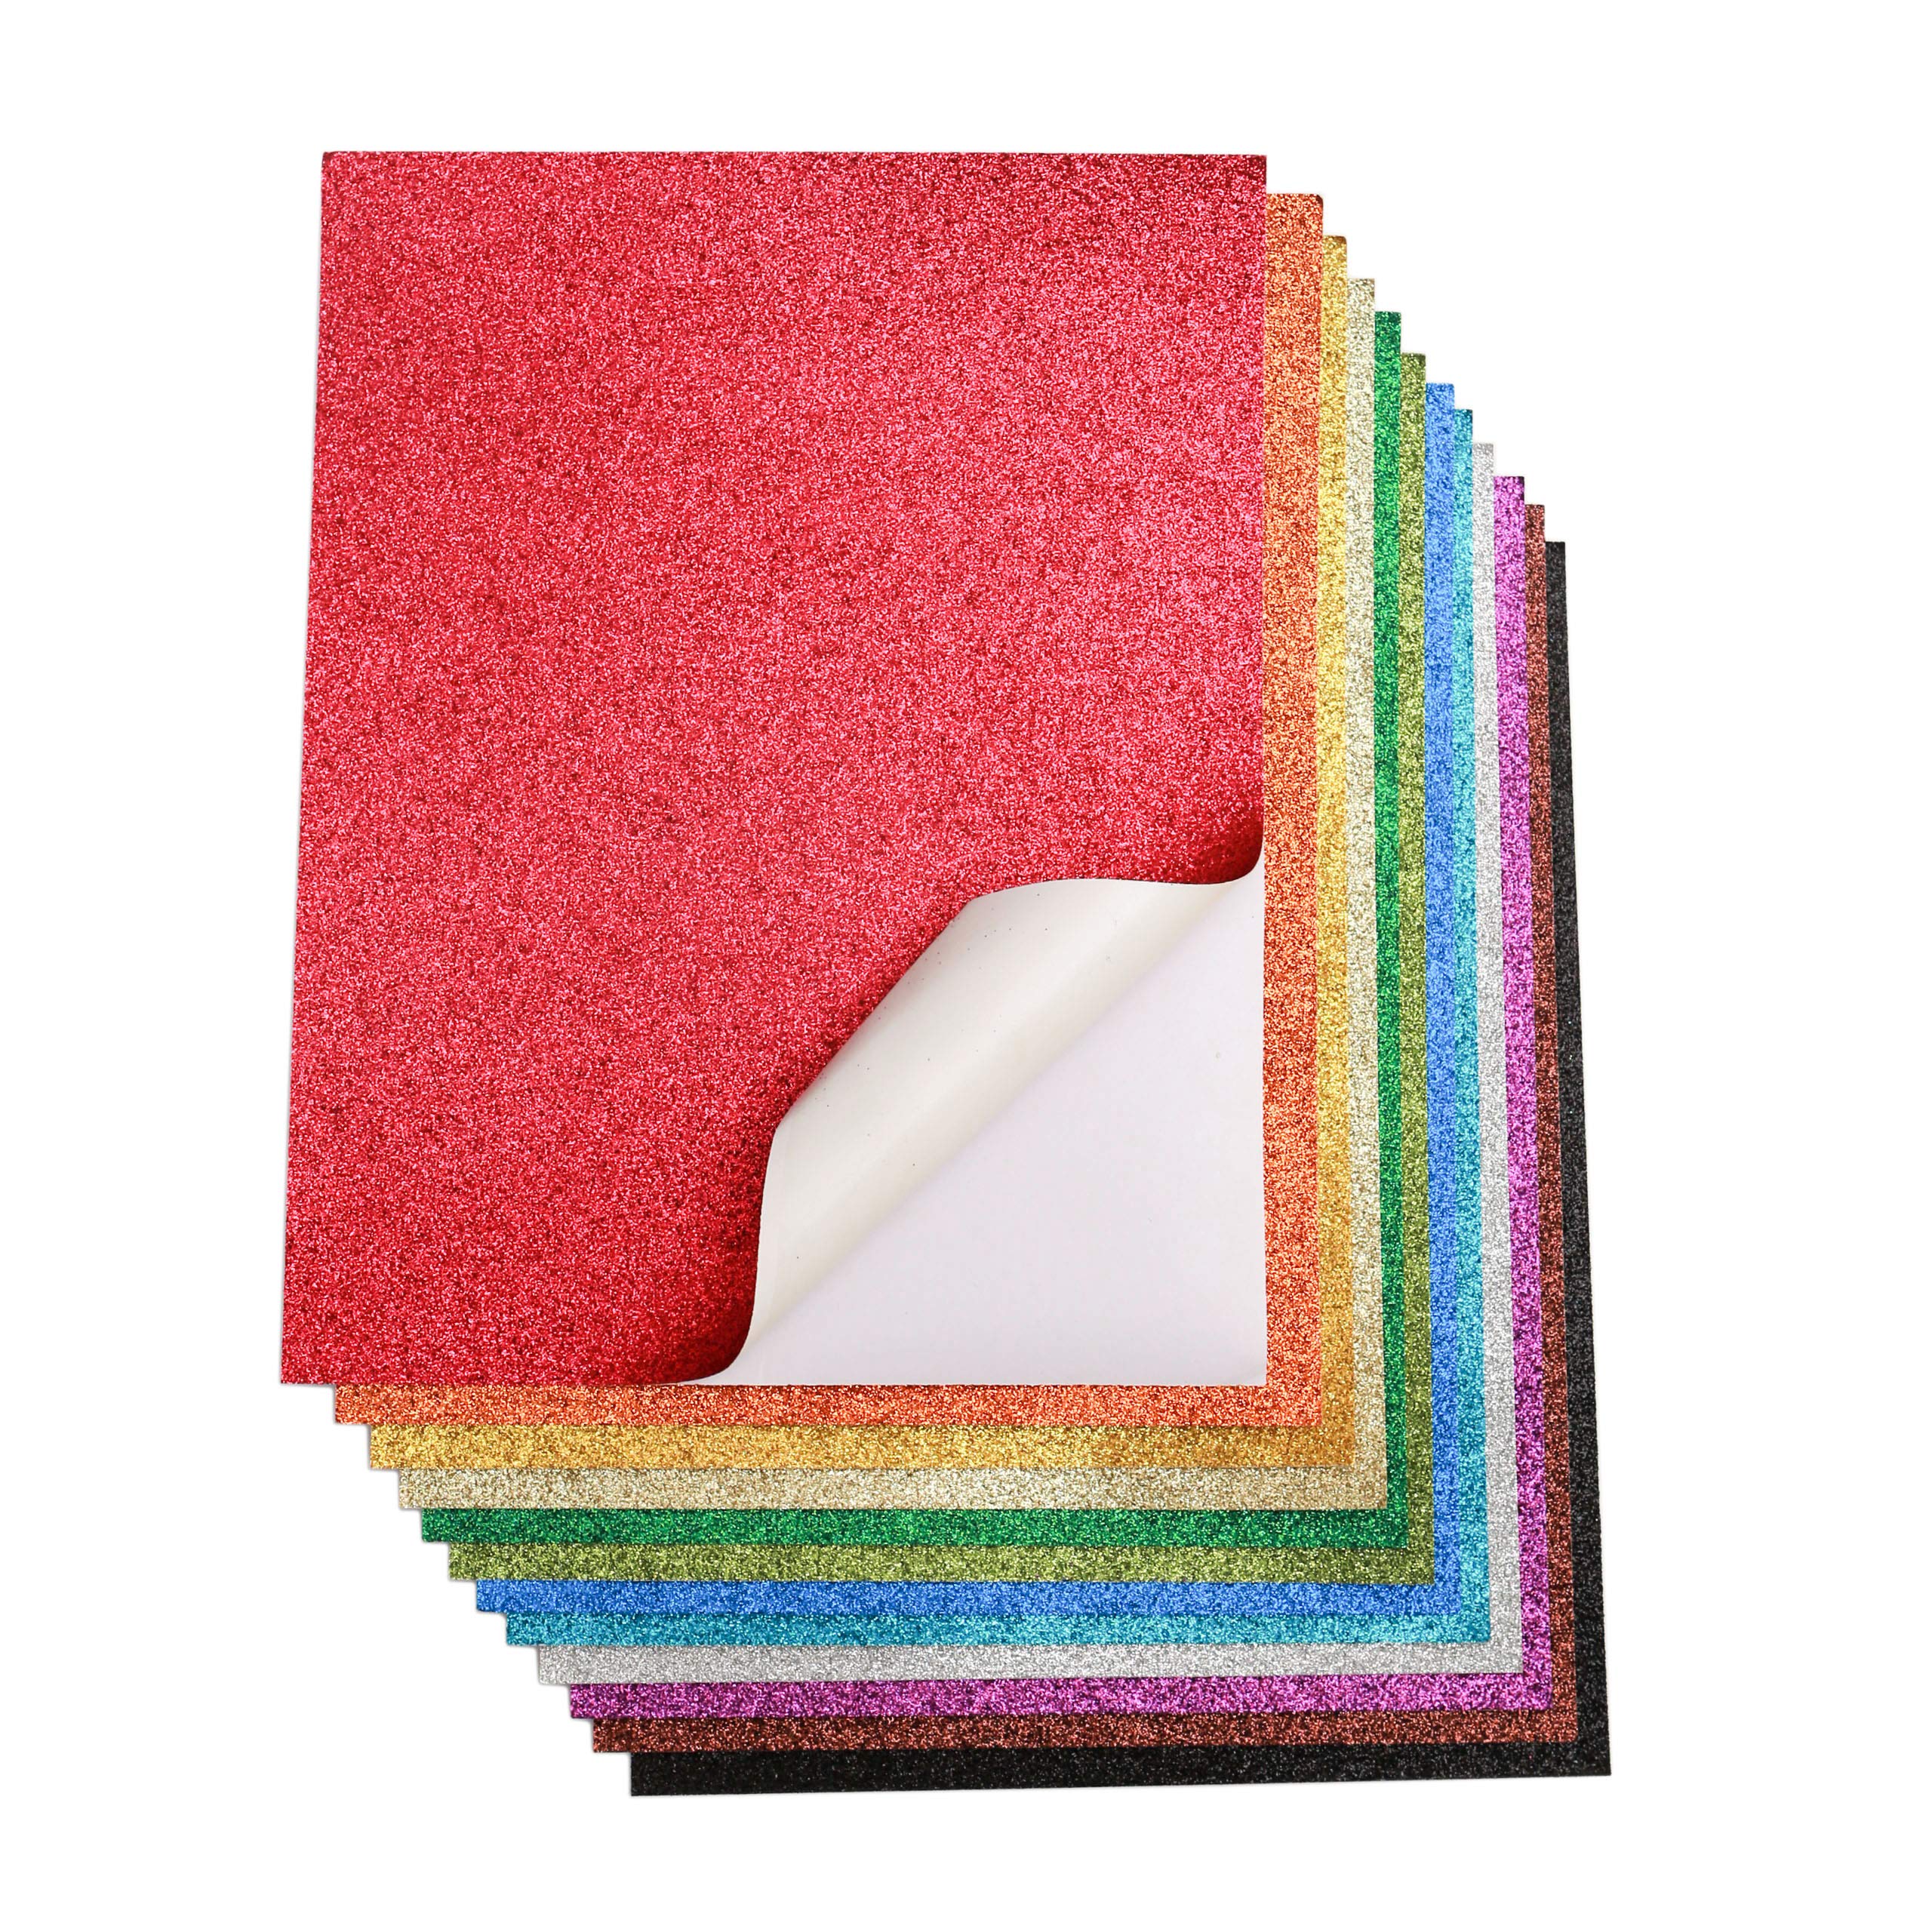 Colored Glitter Paper, 30 Sheets 10 Colors, Light Cardstock for